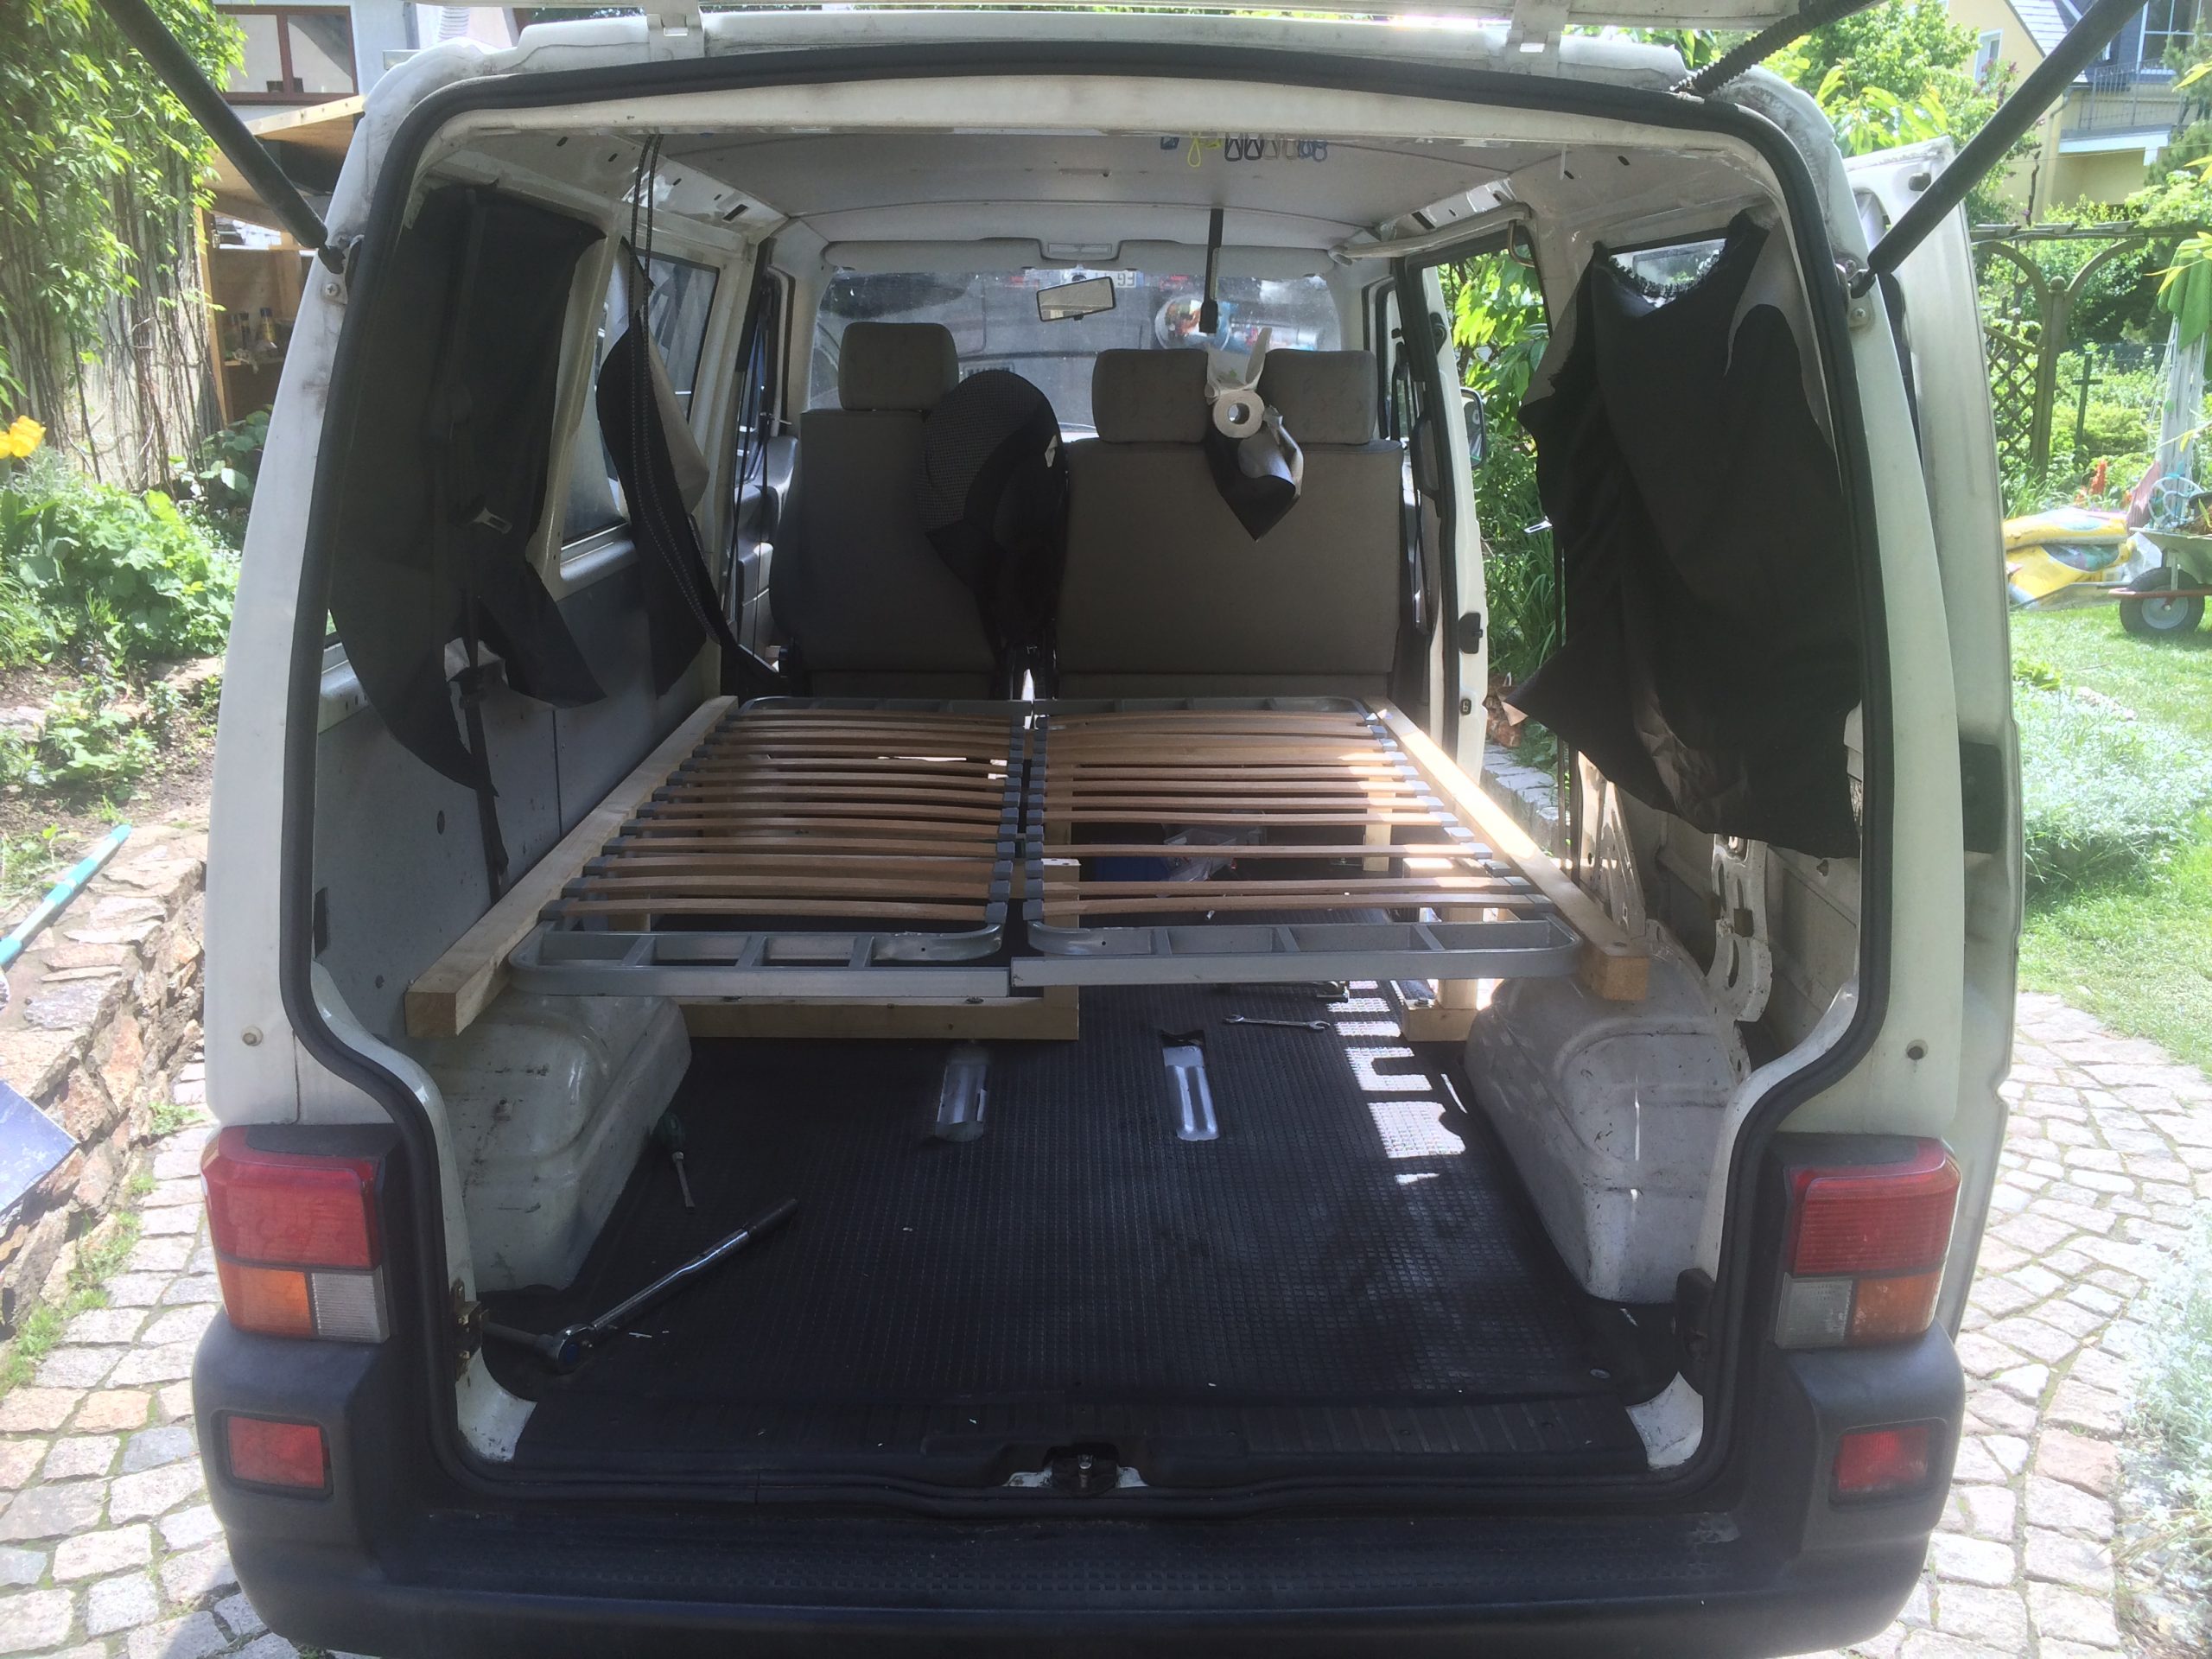 VW T4 Project – Interior construction – Realization - first beddinge test